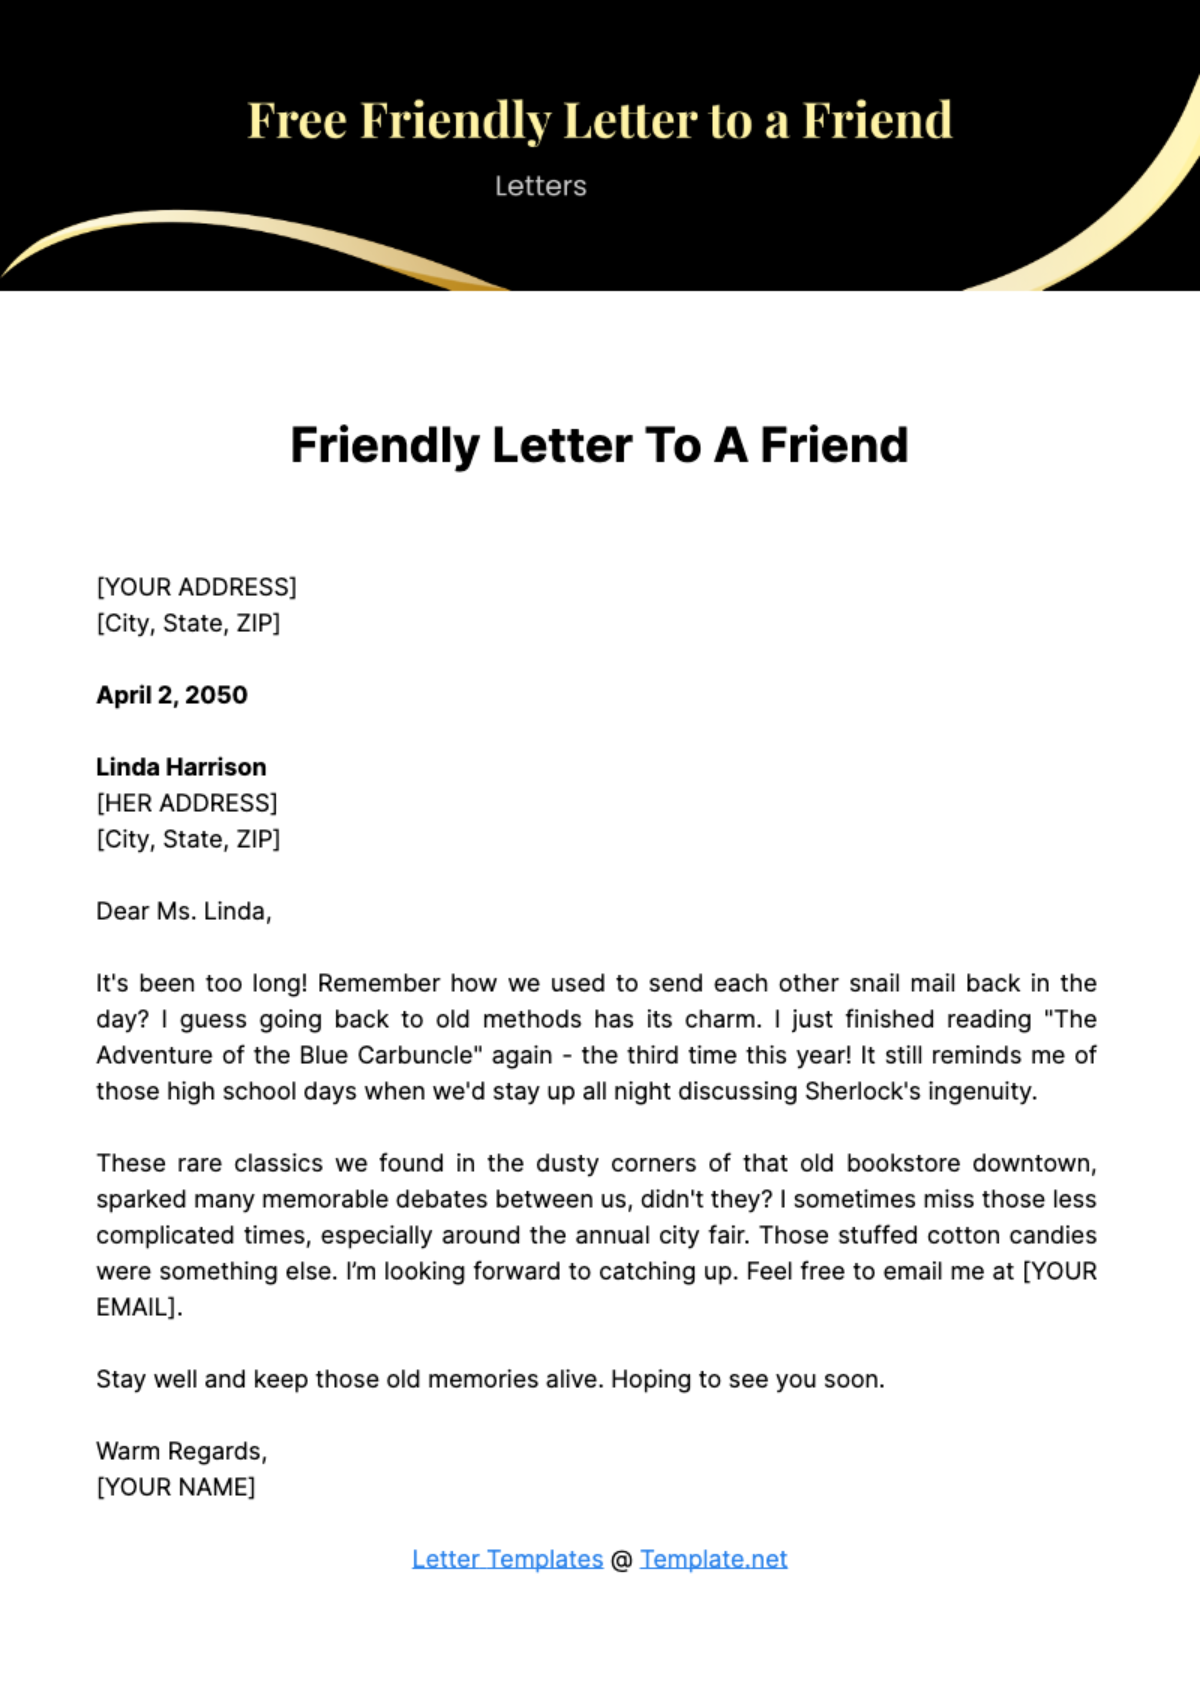 Friendly Letter to a Friend Template